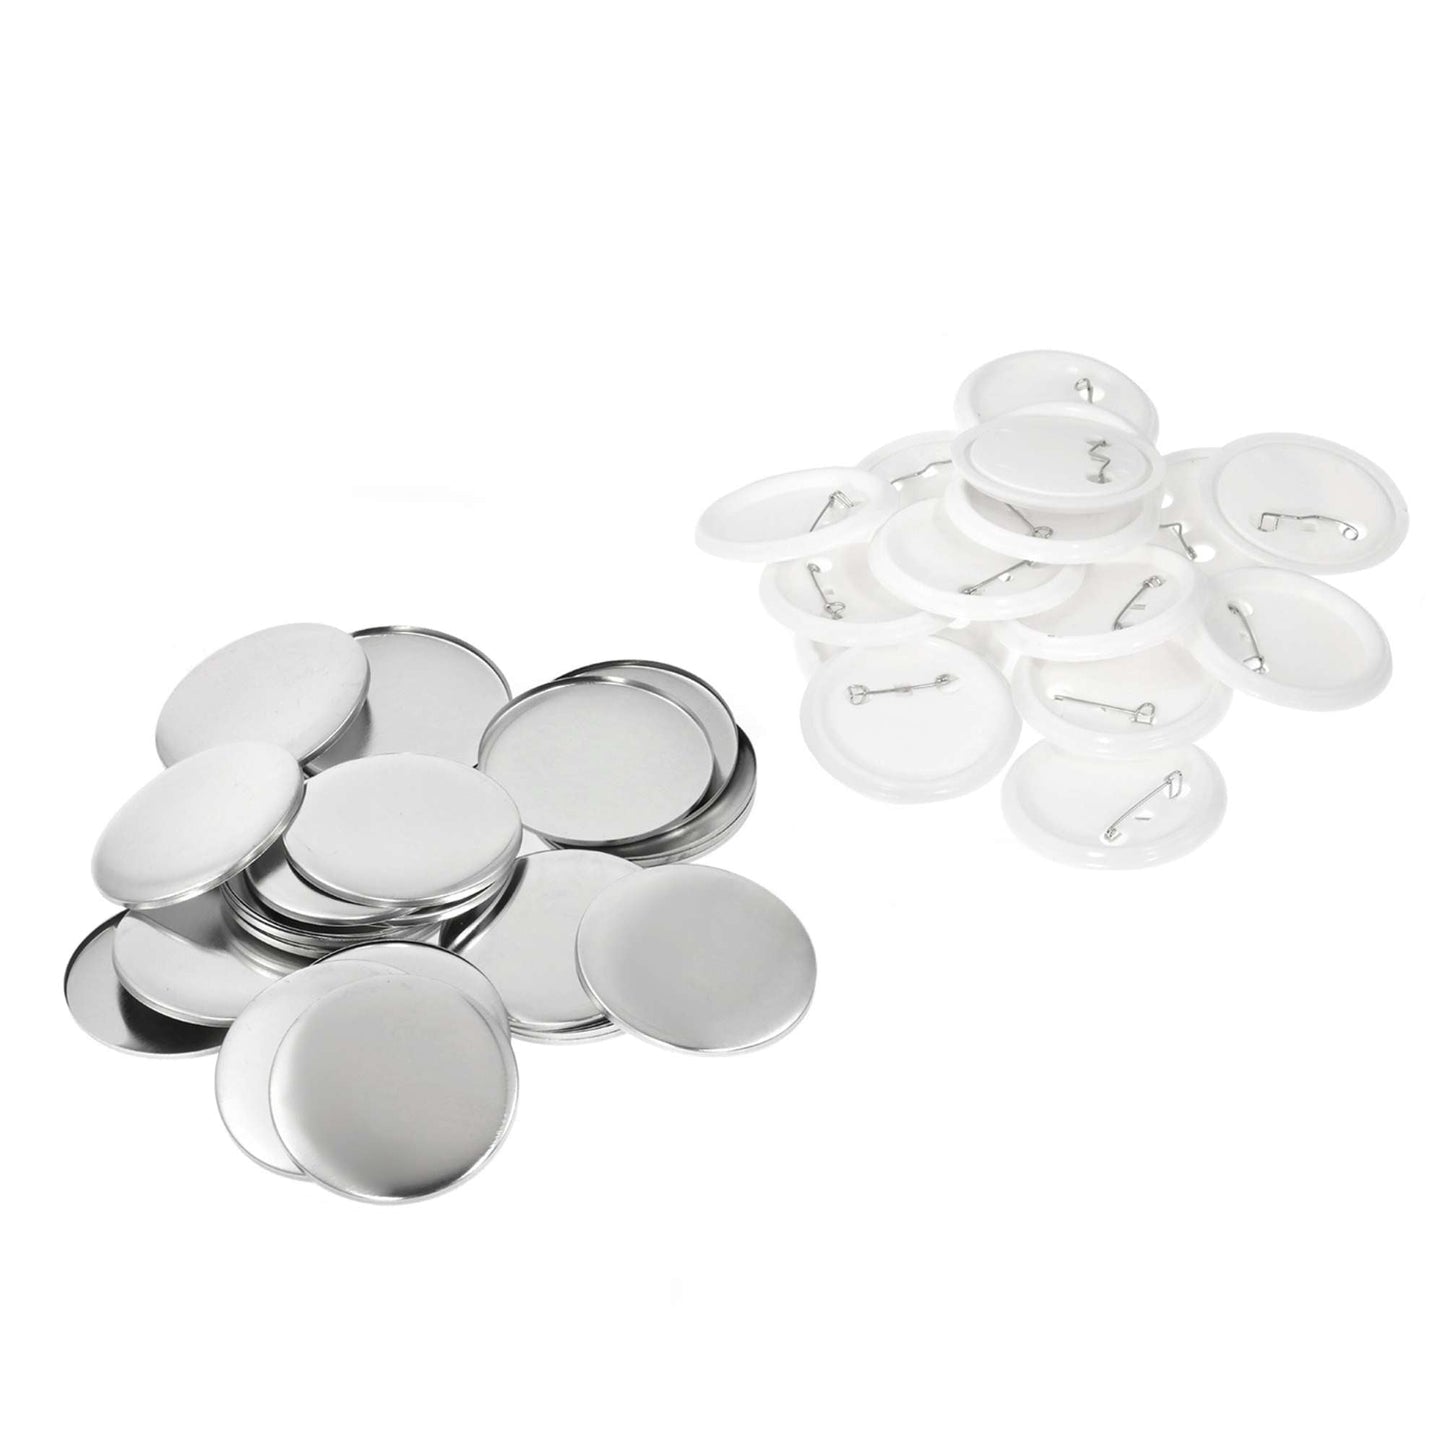 Button Badge 25mm Mould + 500x 25mm Badges - Craft DIY Hobby